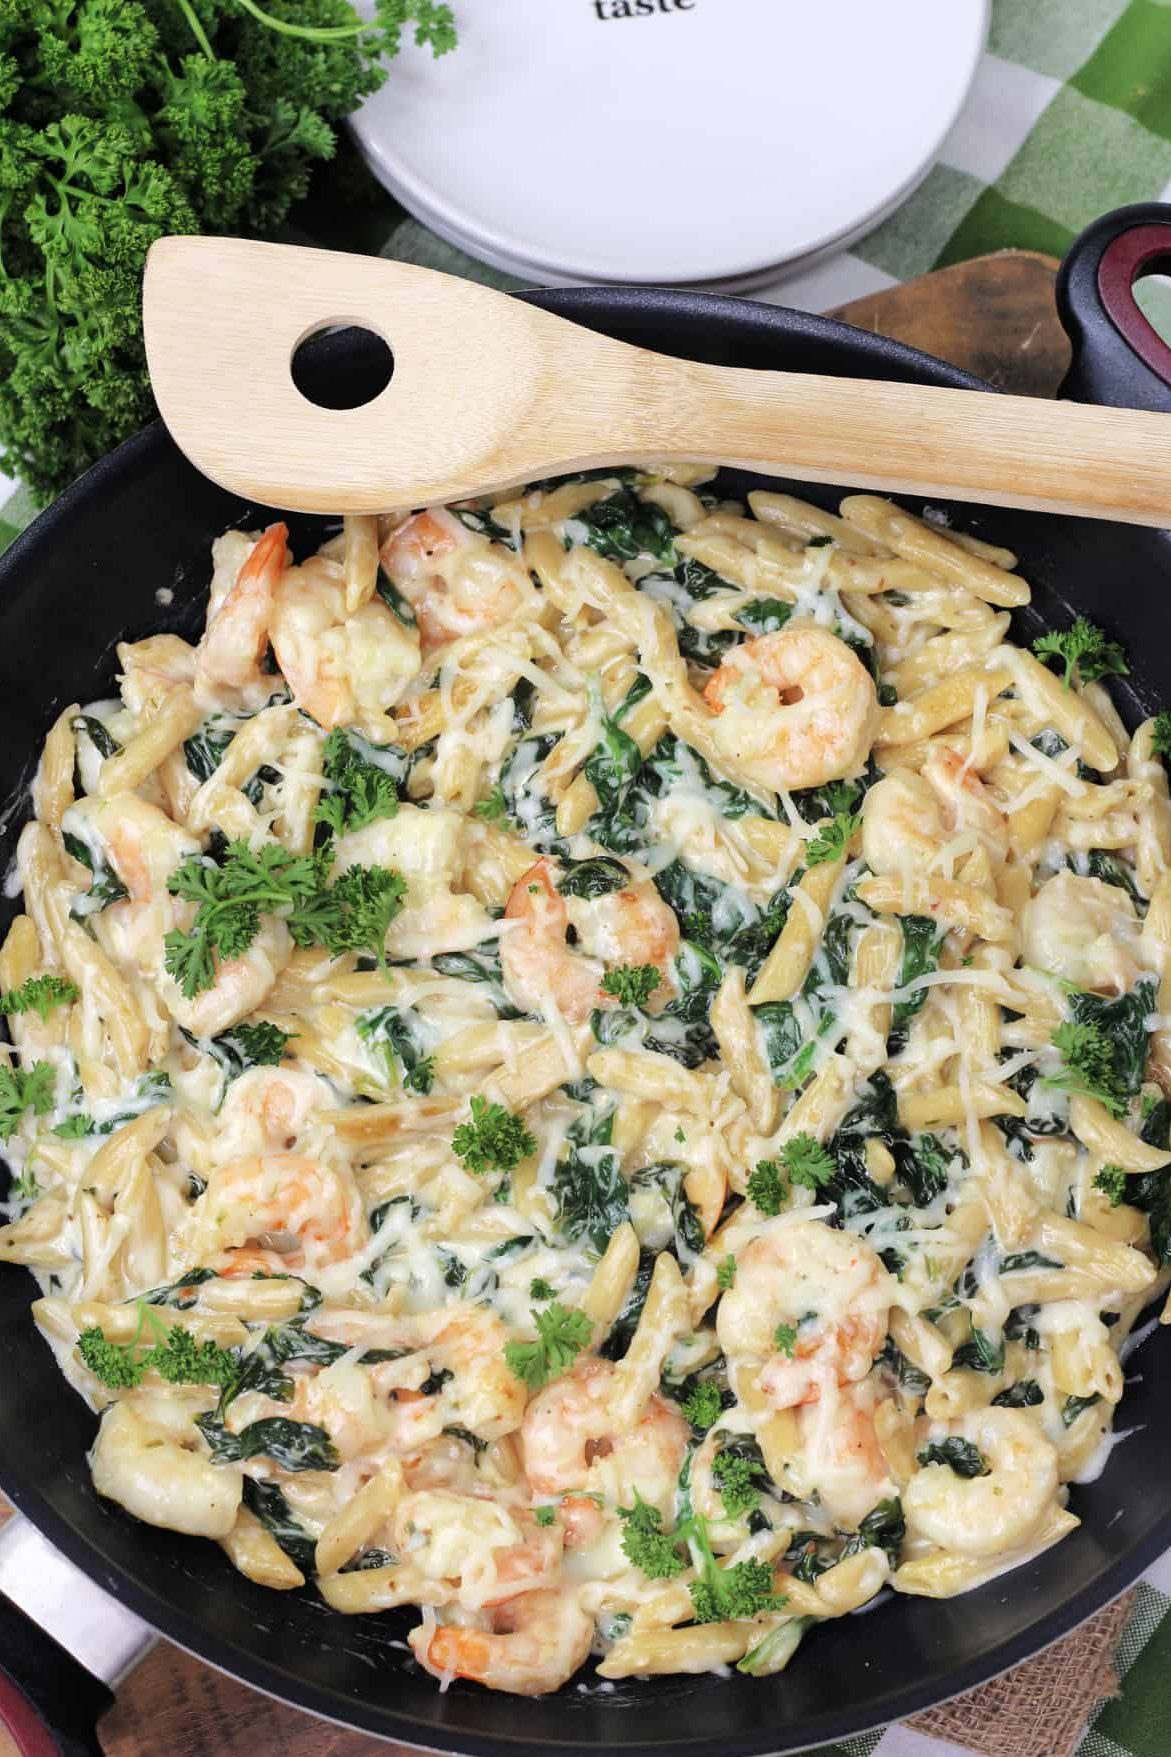 Cheese Shrimp Penne Pasta & Spinach